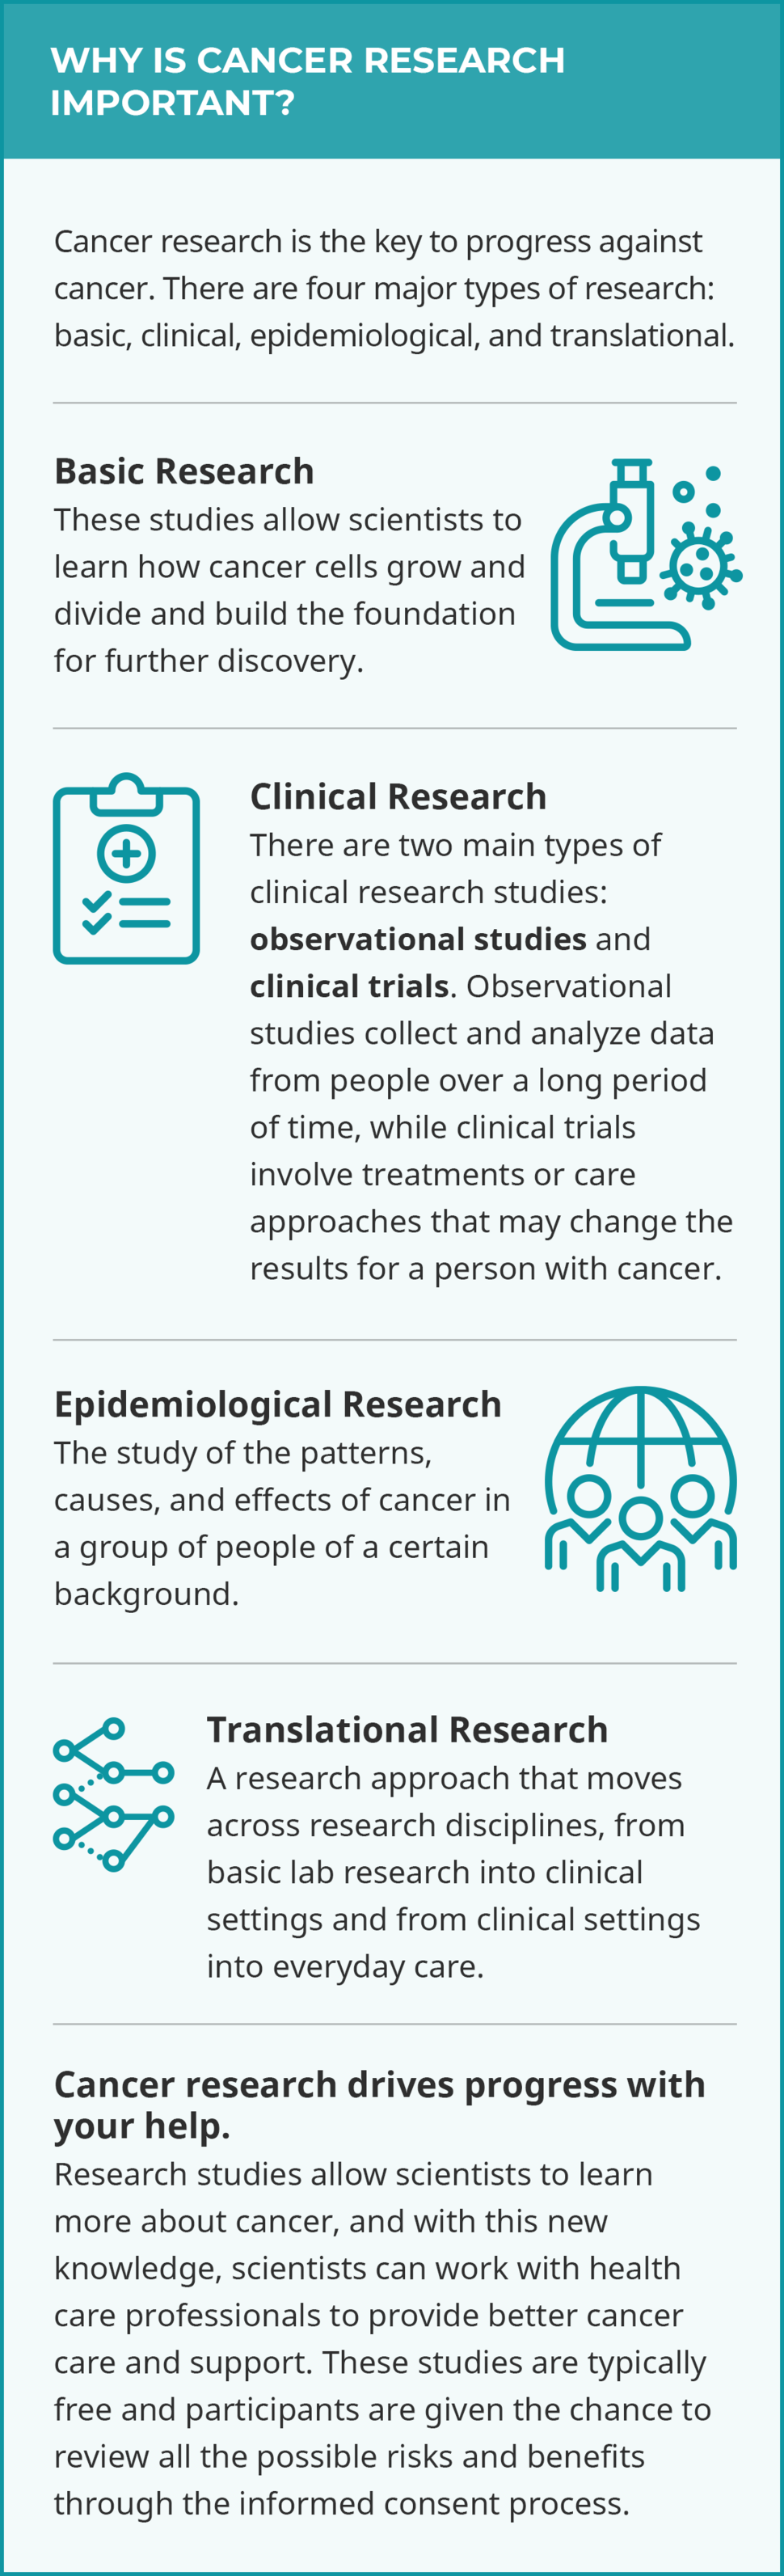 This infographic describes the four main types of cancer research, the differences between each type, and how they can help drive progress. 